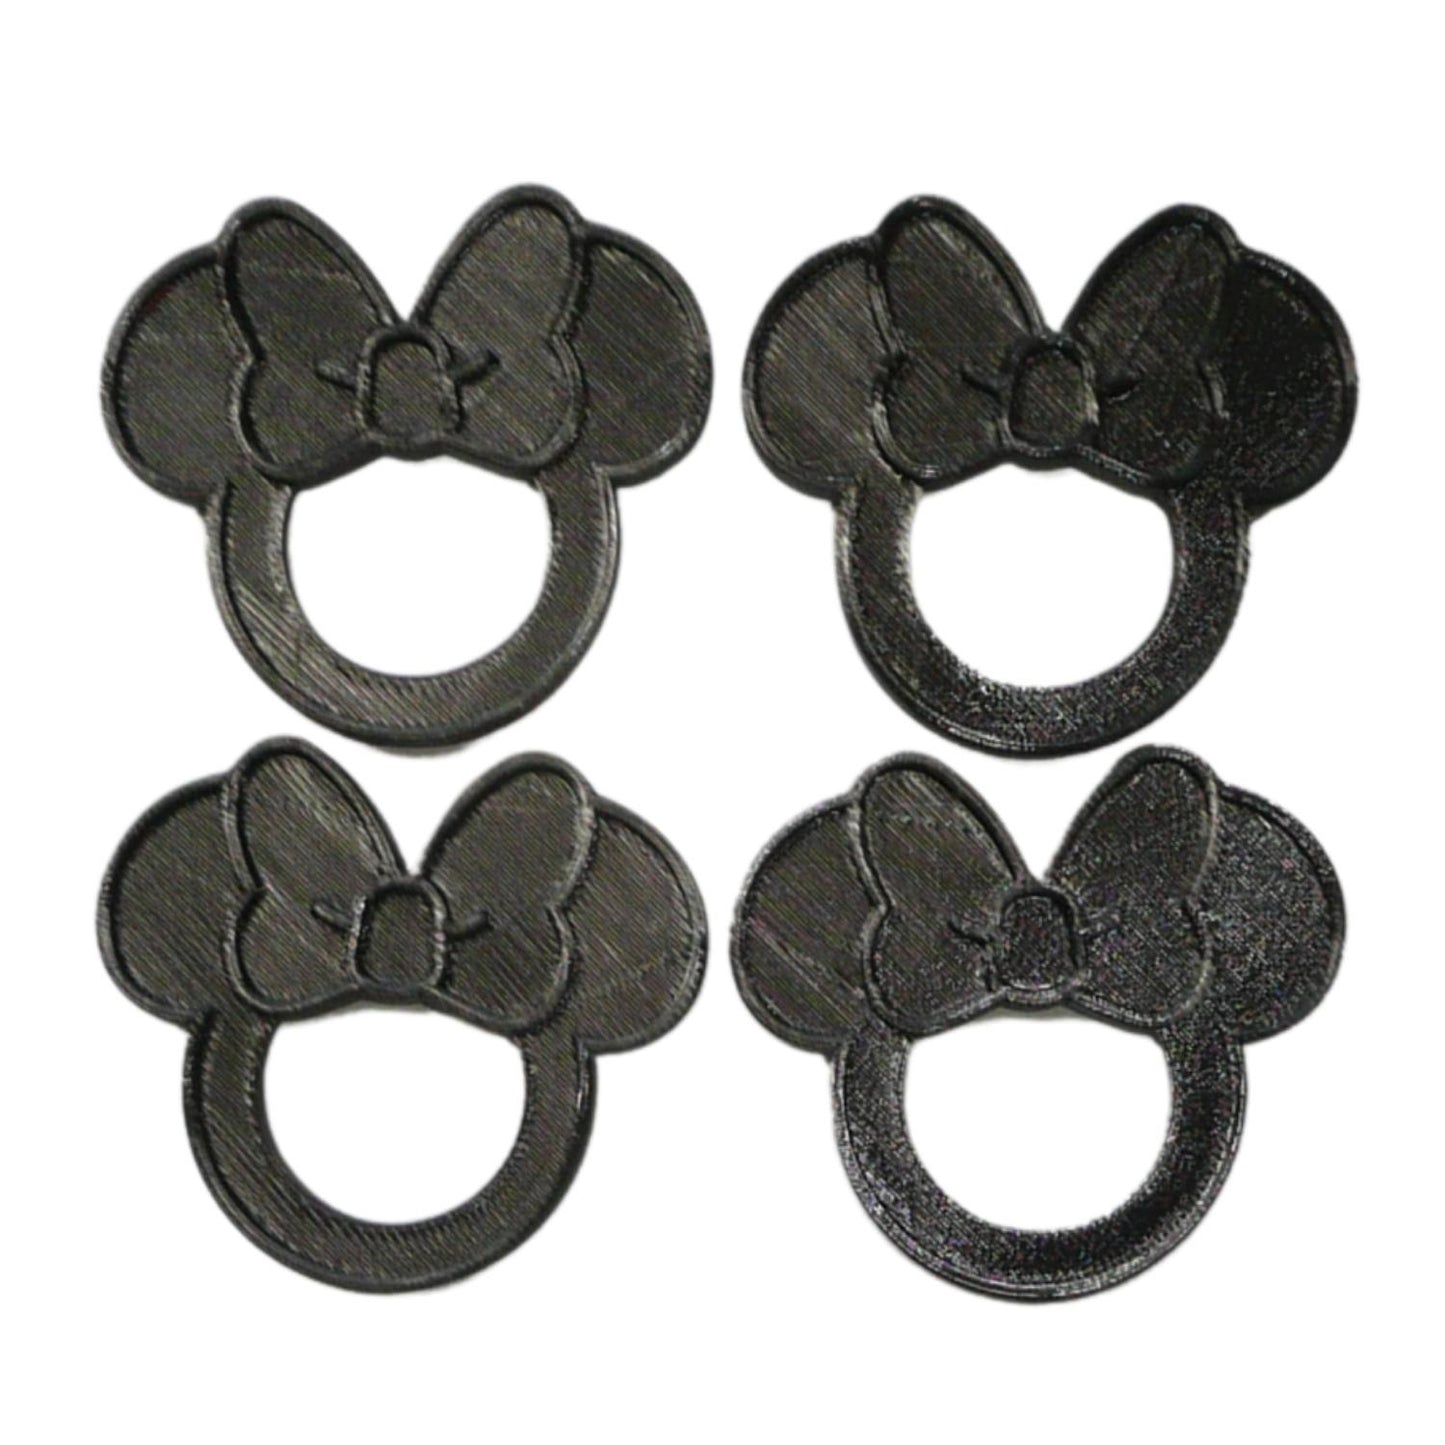 Minnie Mouse Themed Black Napkin Ring Holders Set Of 4 Made In USA PR4803